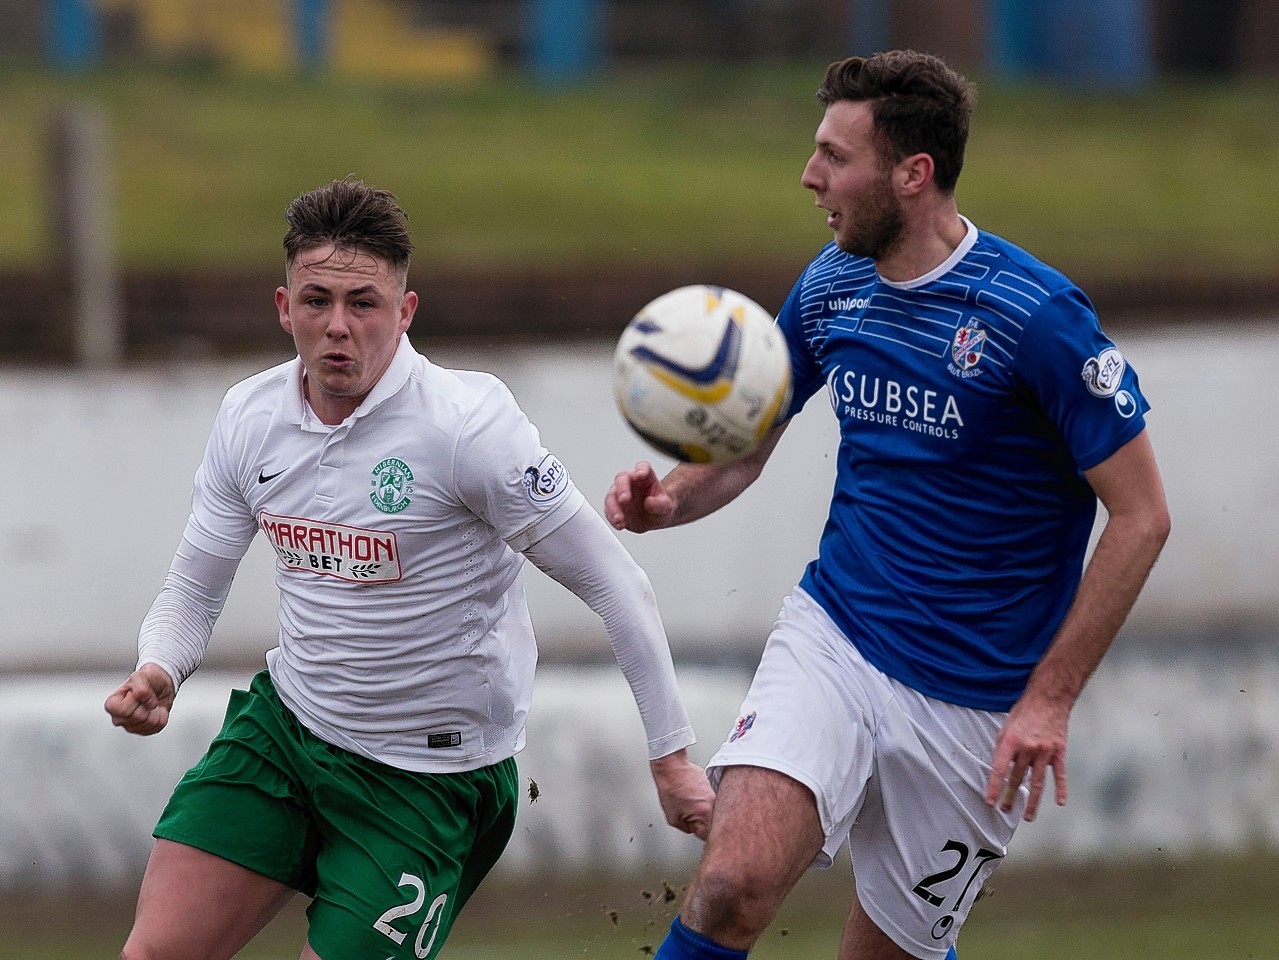 Fraser rediscovered his fitness and form at Cowdenbeath and has impressed at County